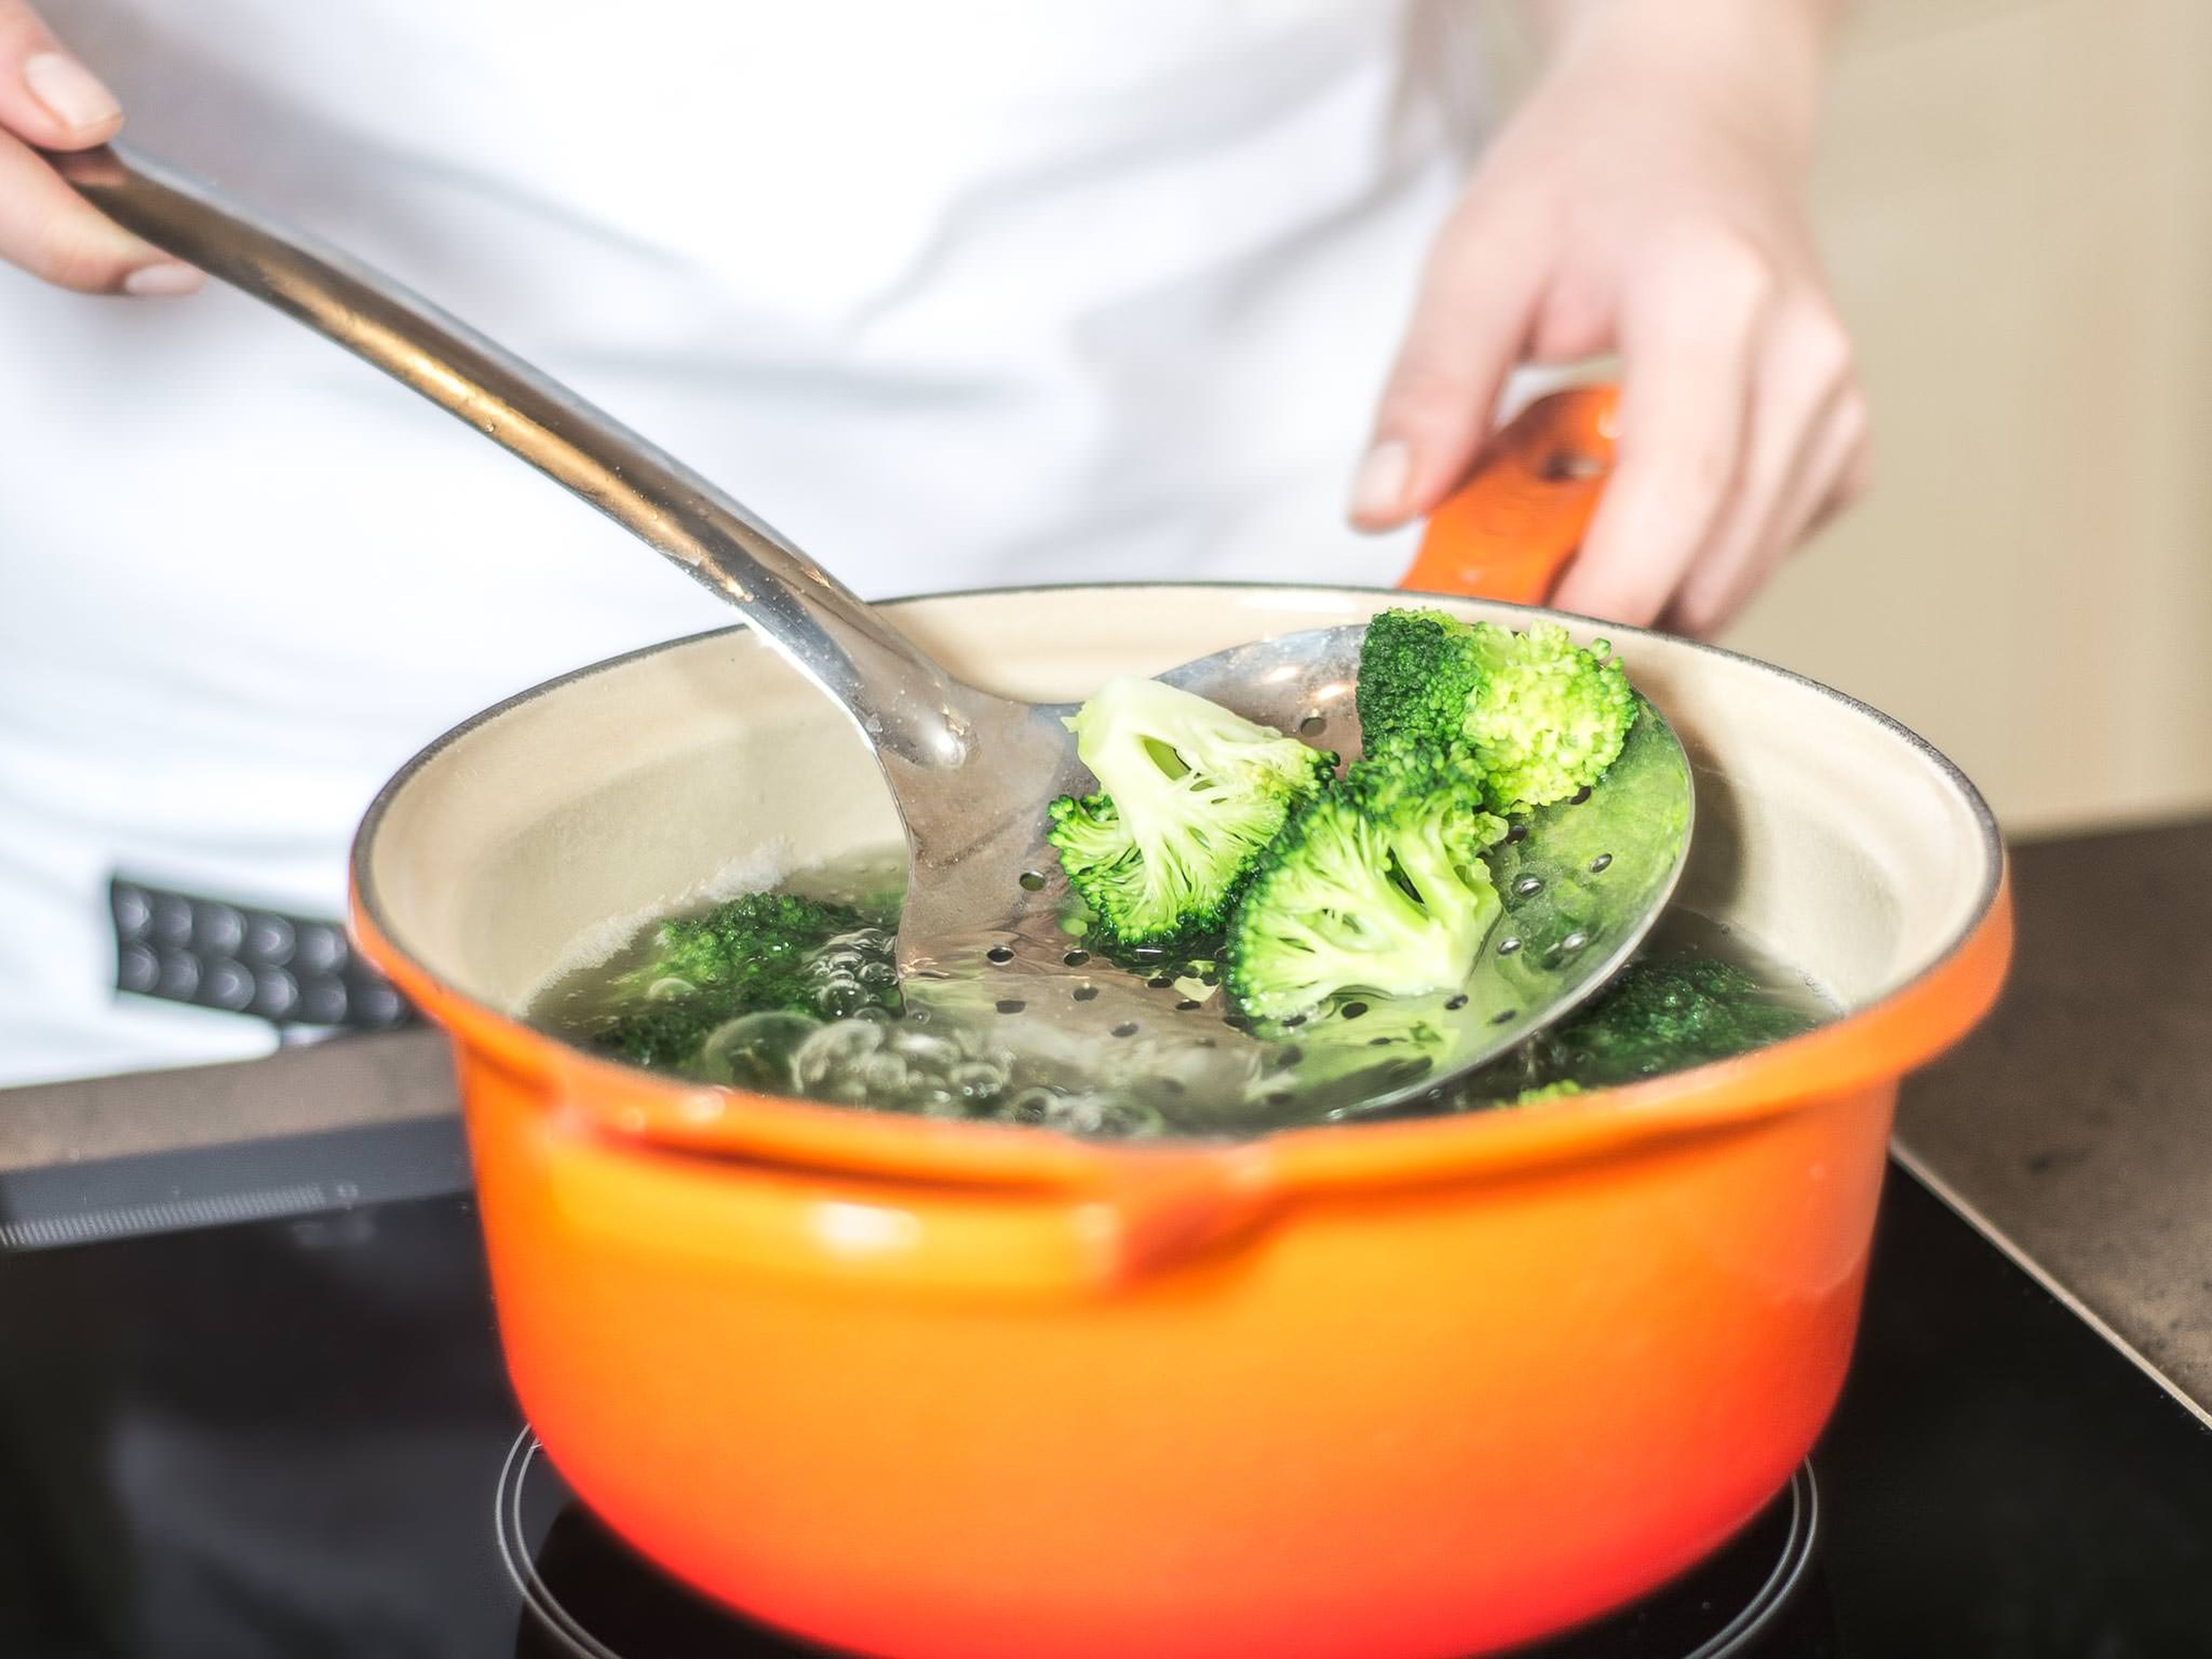 Blanch the broccoli in salted boiling water for 3 - 4 min., so that it is still crunchy. Drain and set aside.